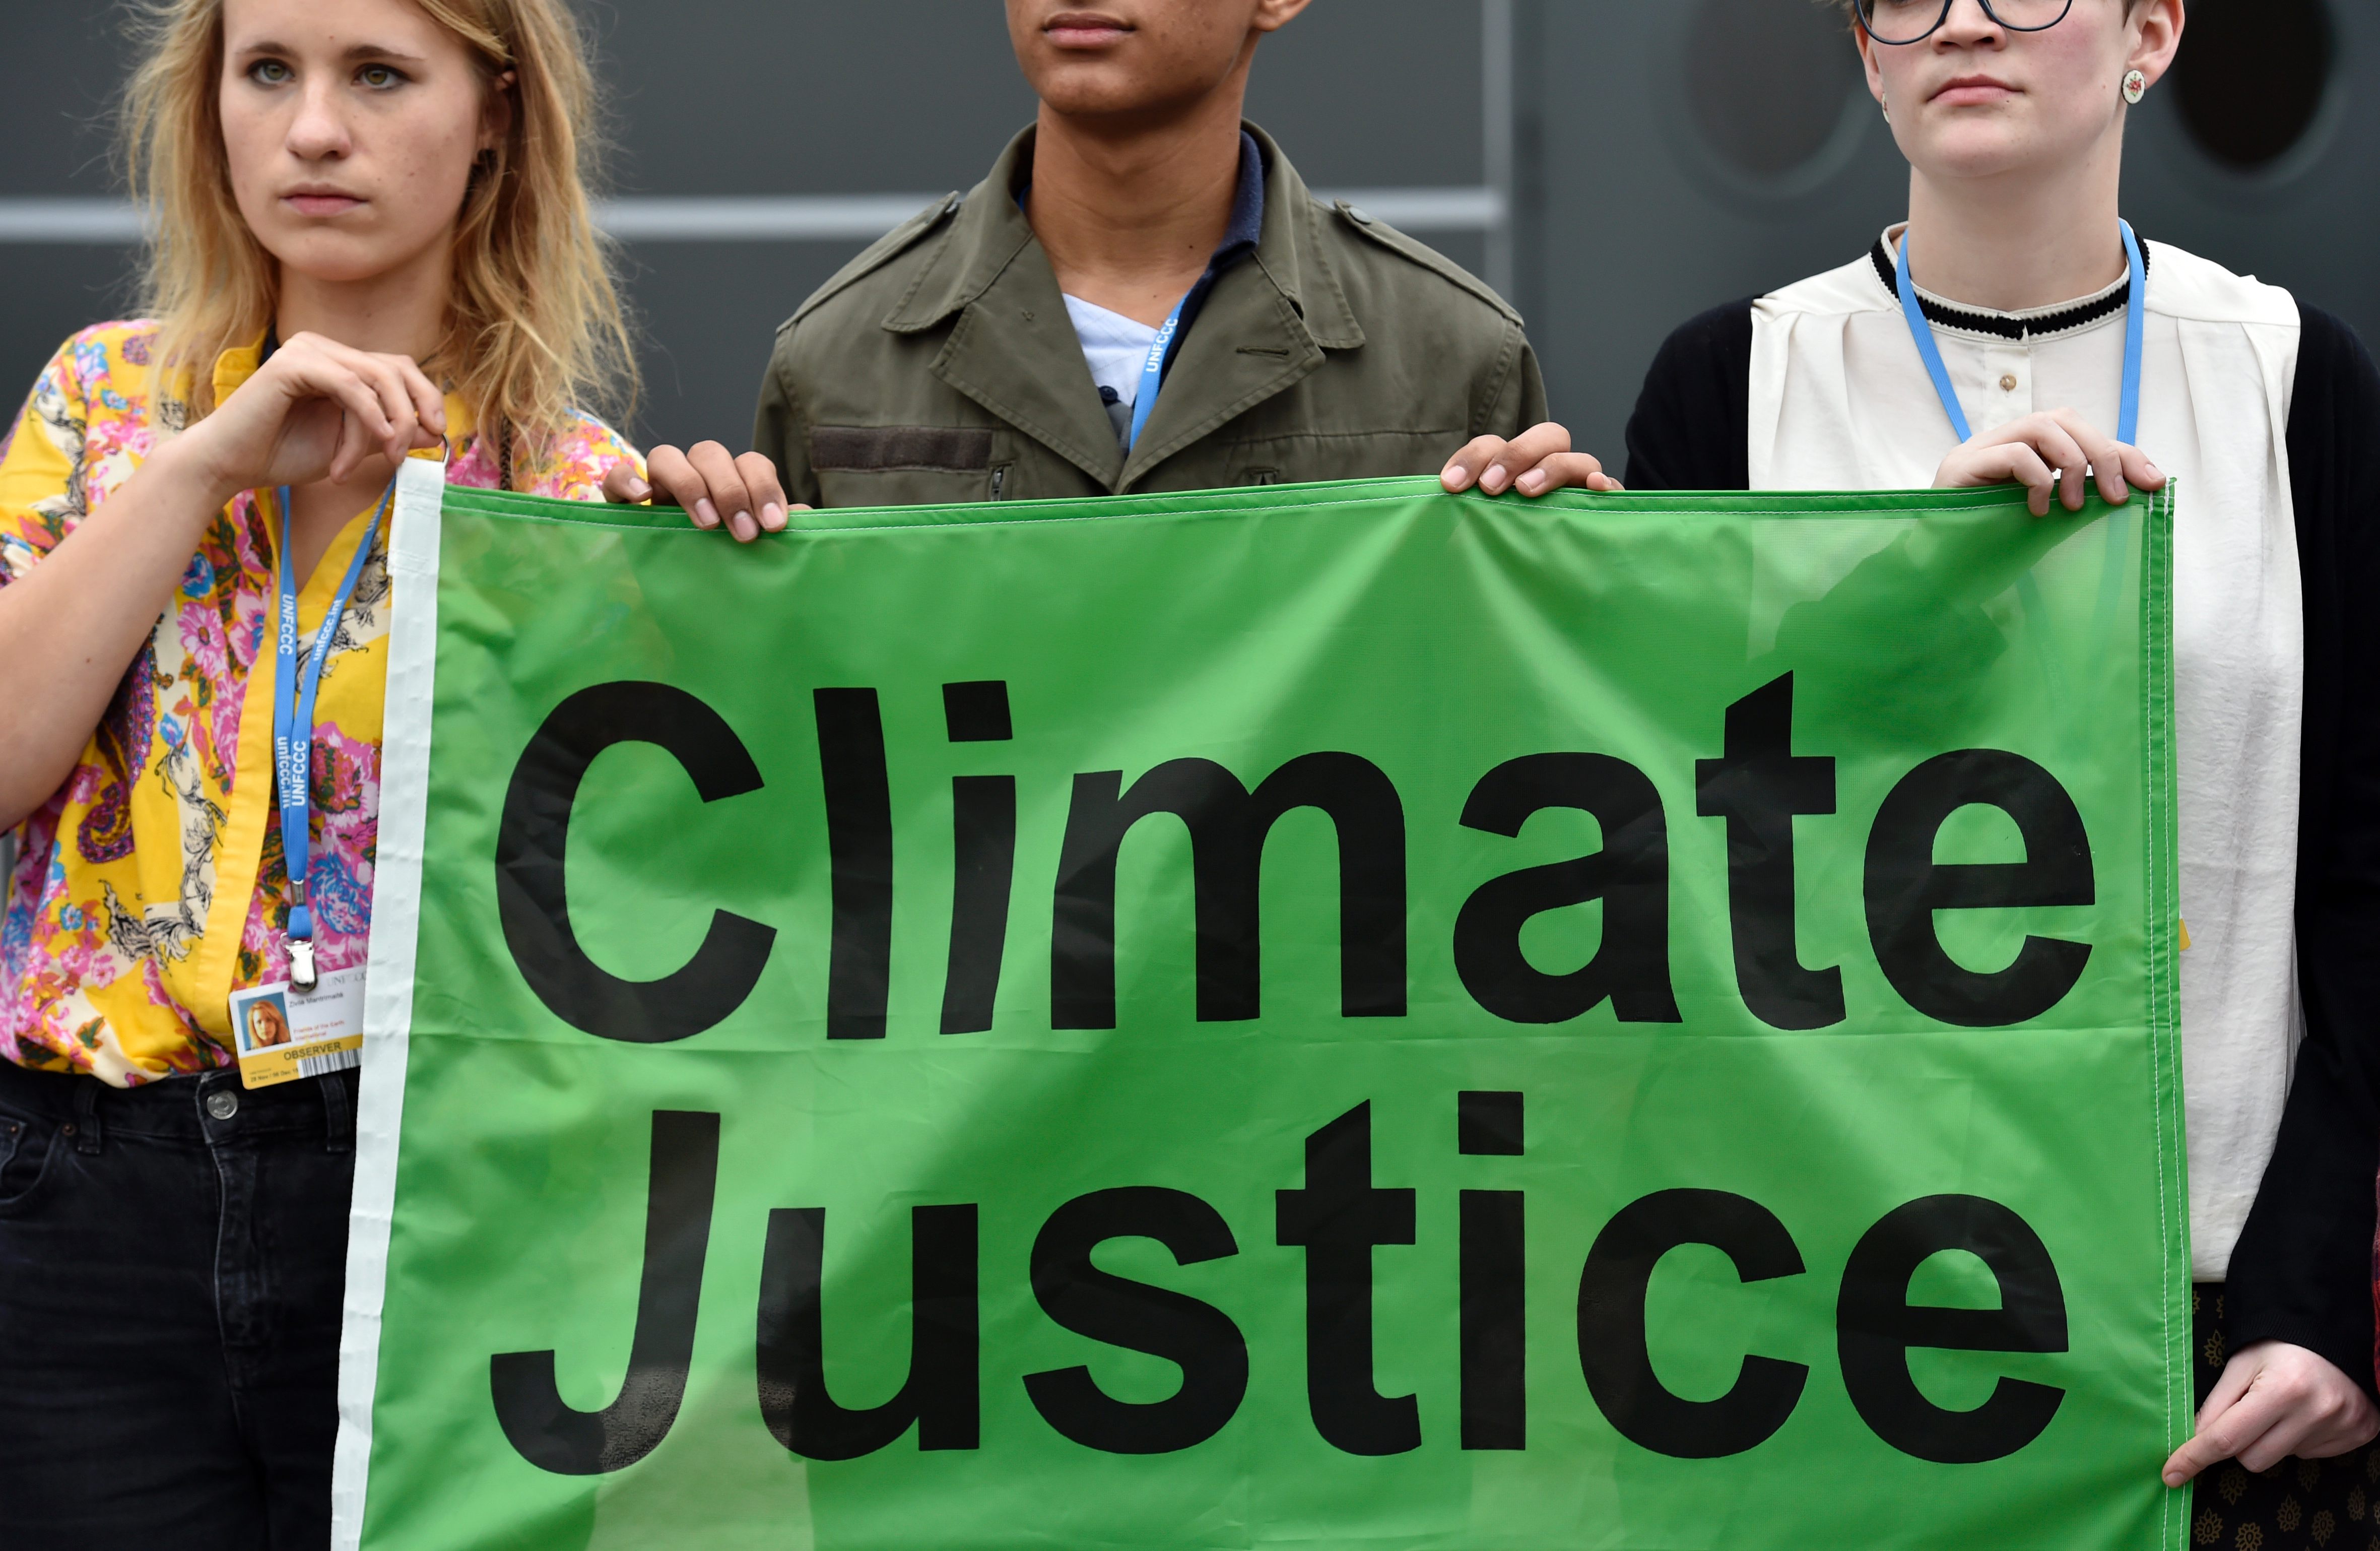 Members of Non-Governmental Organisation "Friends of the Earth" demonstrate during the United Nations conference on climate change COP21, on December 1, 2015 at Le Bourget, on the outskirts of French capital Paris. More than 150 world leaders are meeting under heightened security, for the 21st Session of the Conference of the Parties to the United Nations Framework Convention on Climate Change (COP21/CMP11), also known as “Paris 2015” from November 30 to December 11. / AFP / LOIC VENANCE